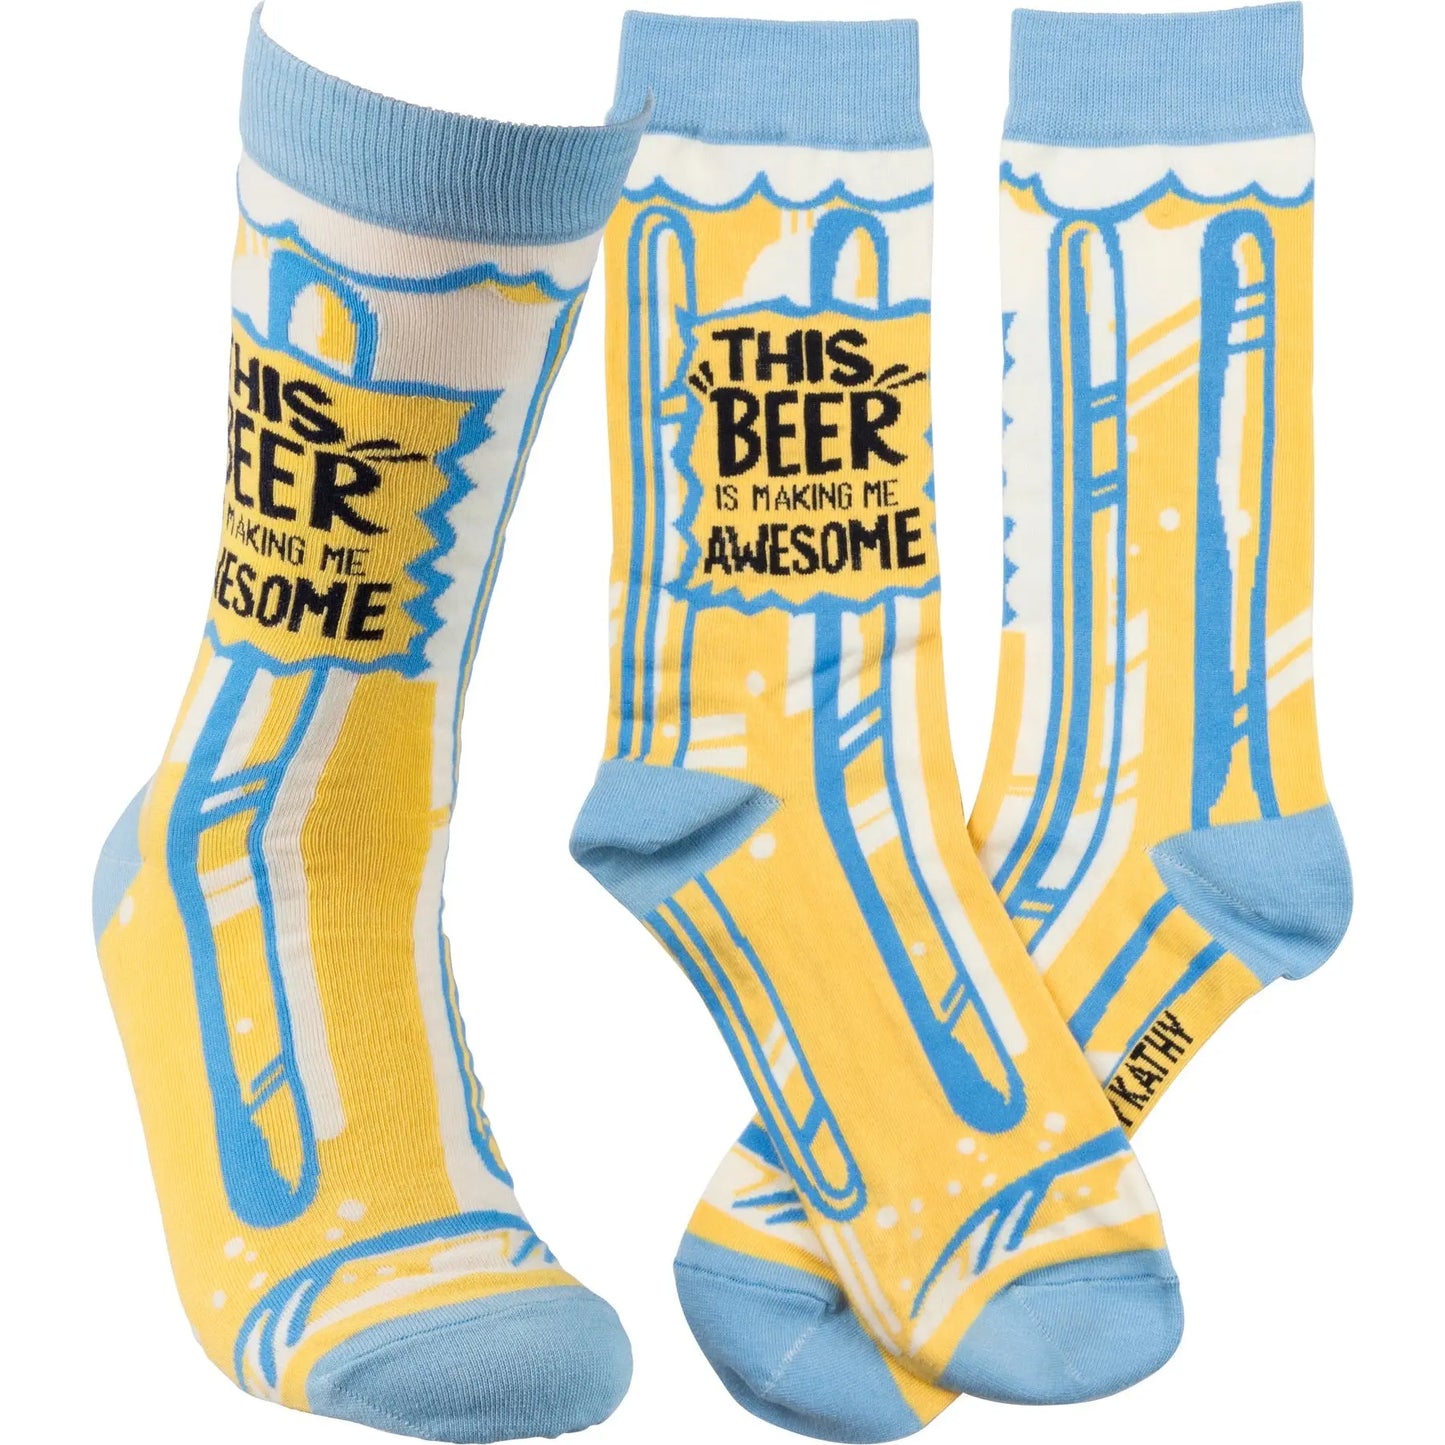 Primitives By Kathy - "This Beer..." Socks PRIMITIVES BY KATHY